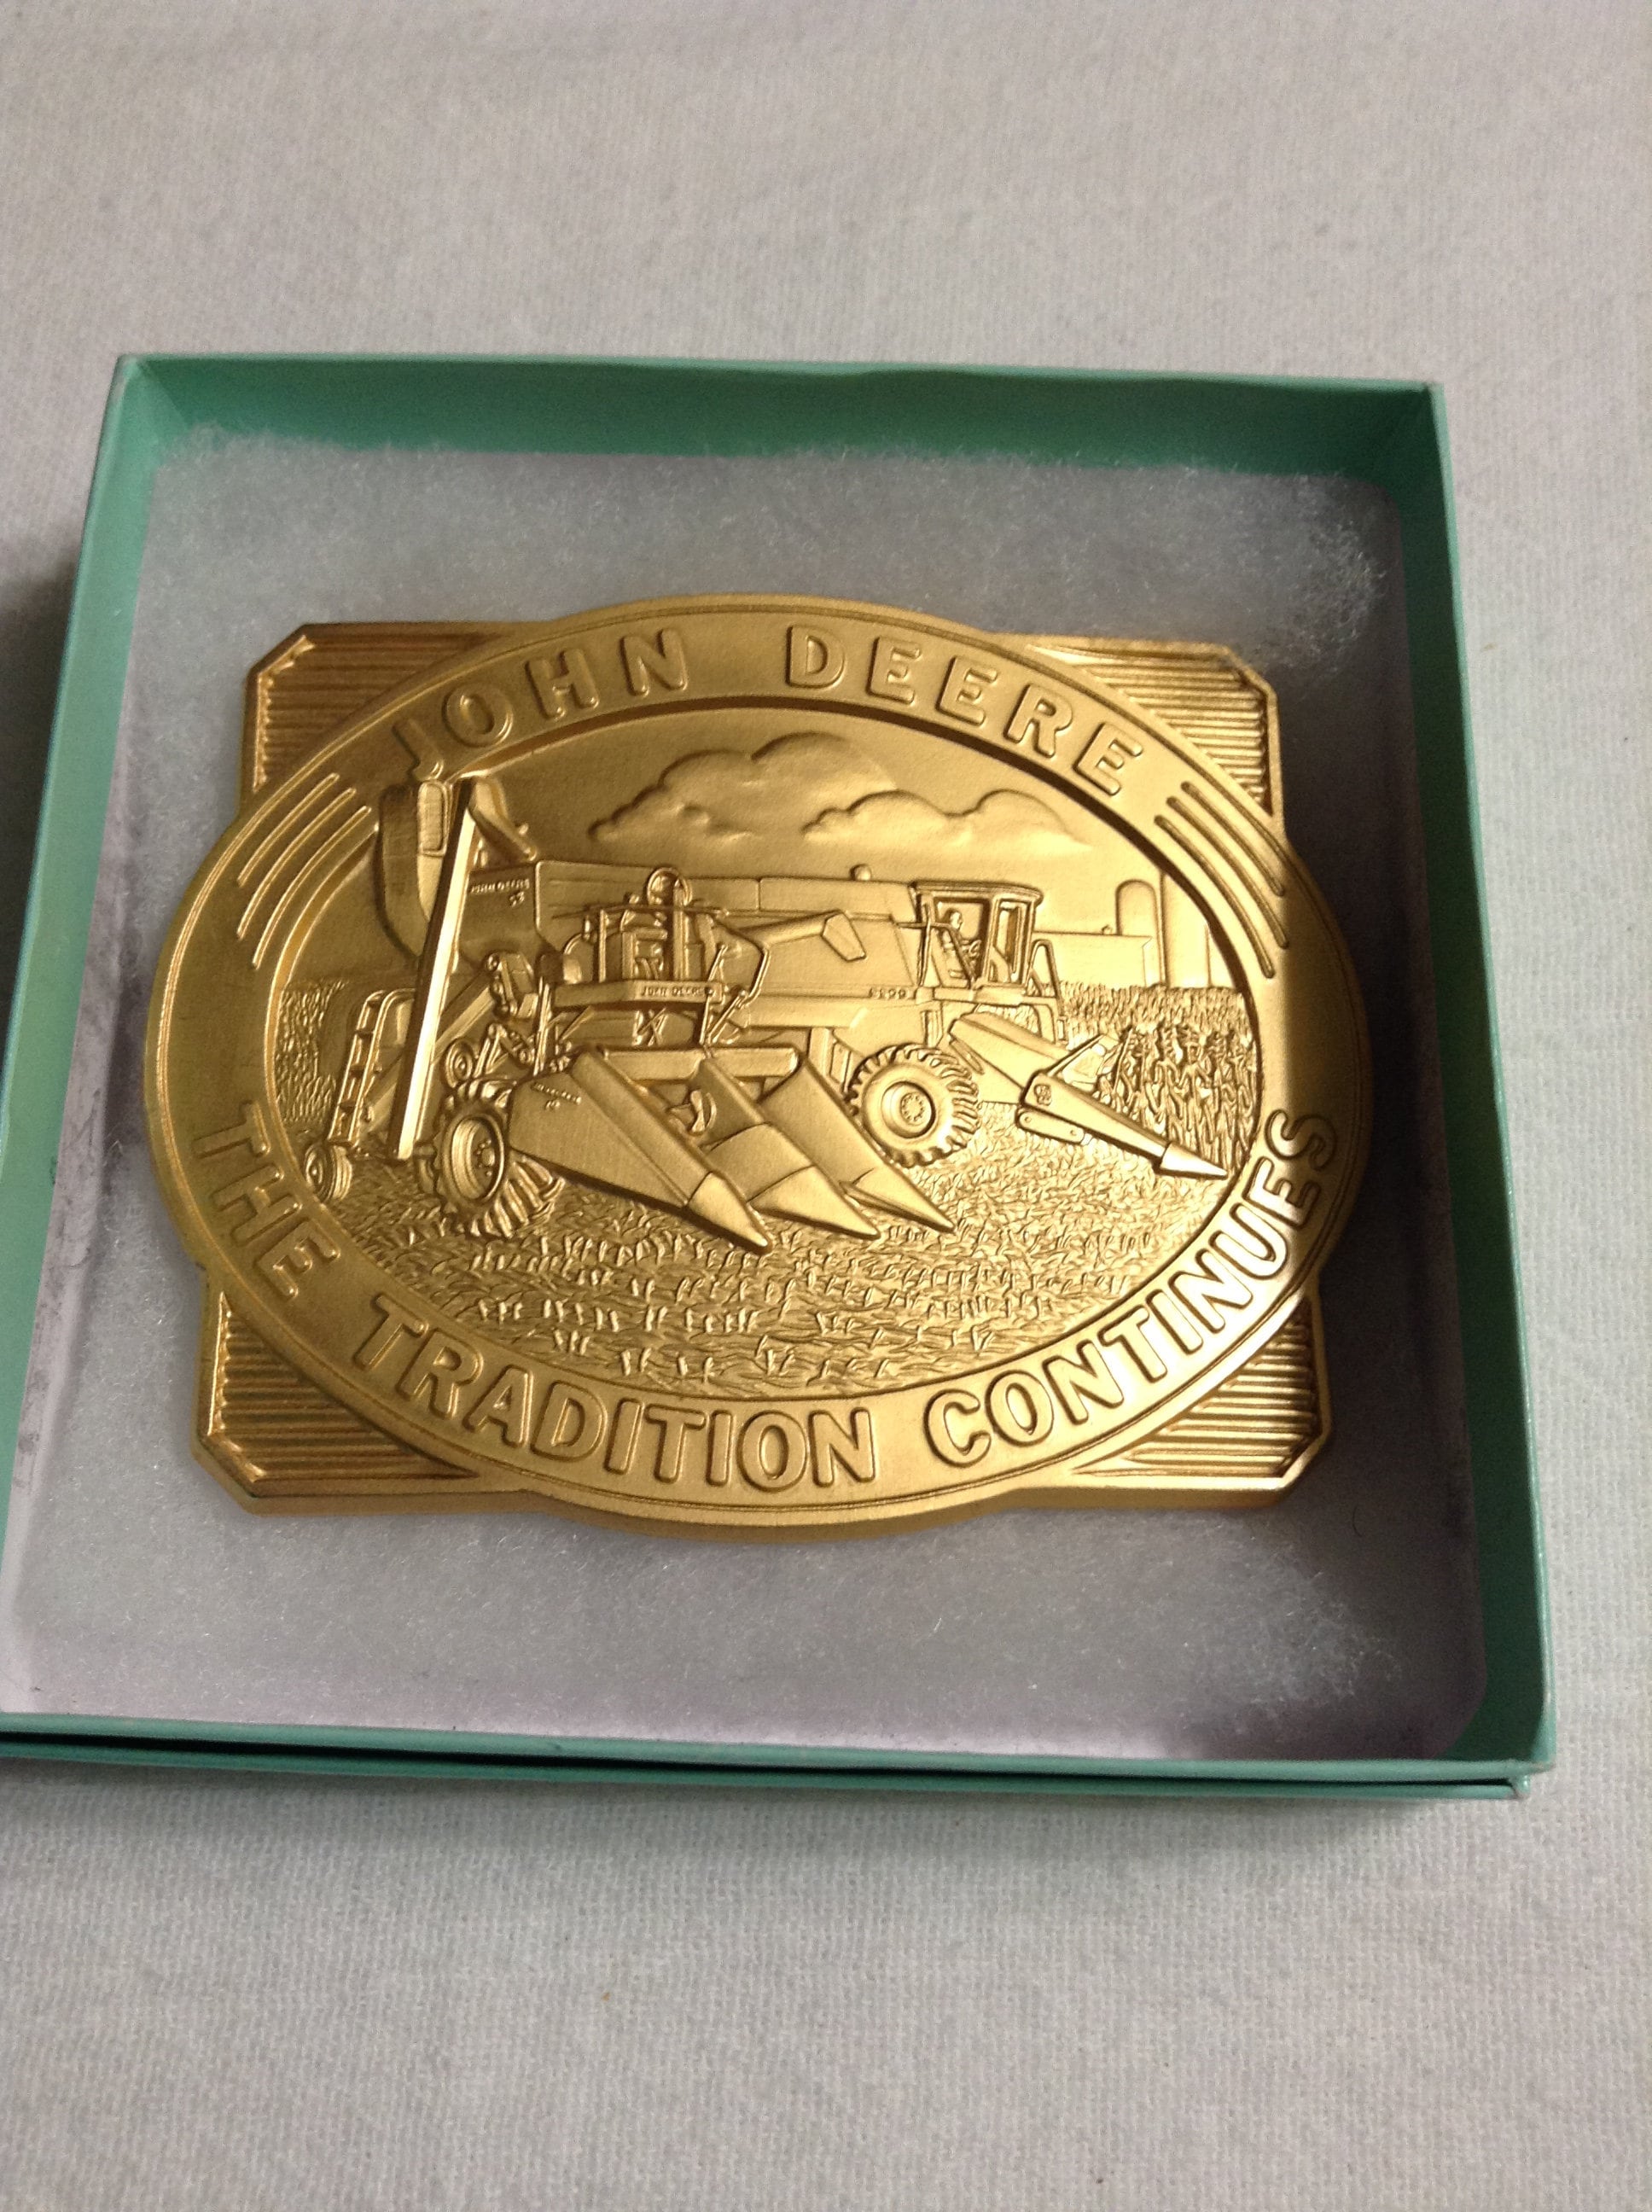 Details about   JohnDeere Day 89  Belt Buckle 1989 Moline IL Deere & Company In original package 